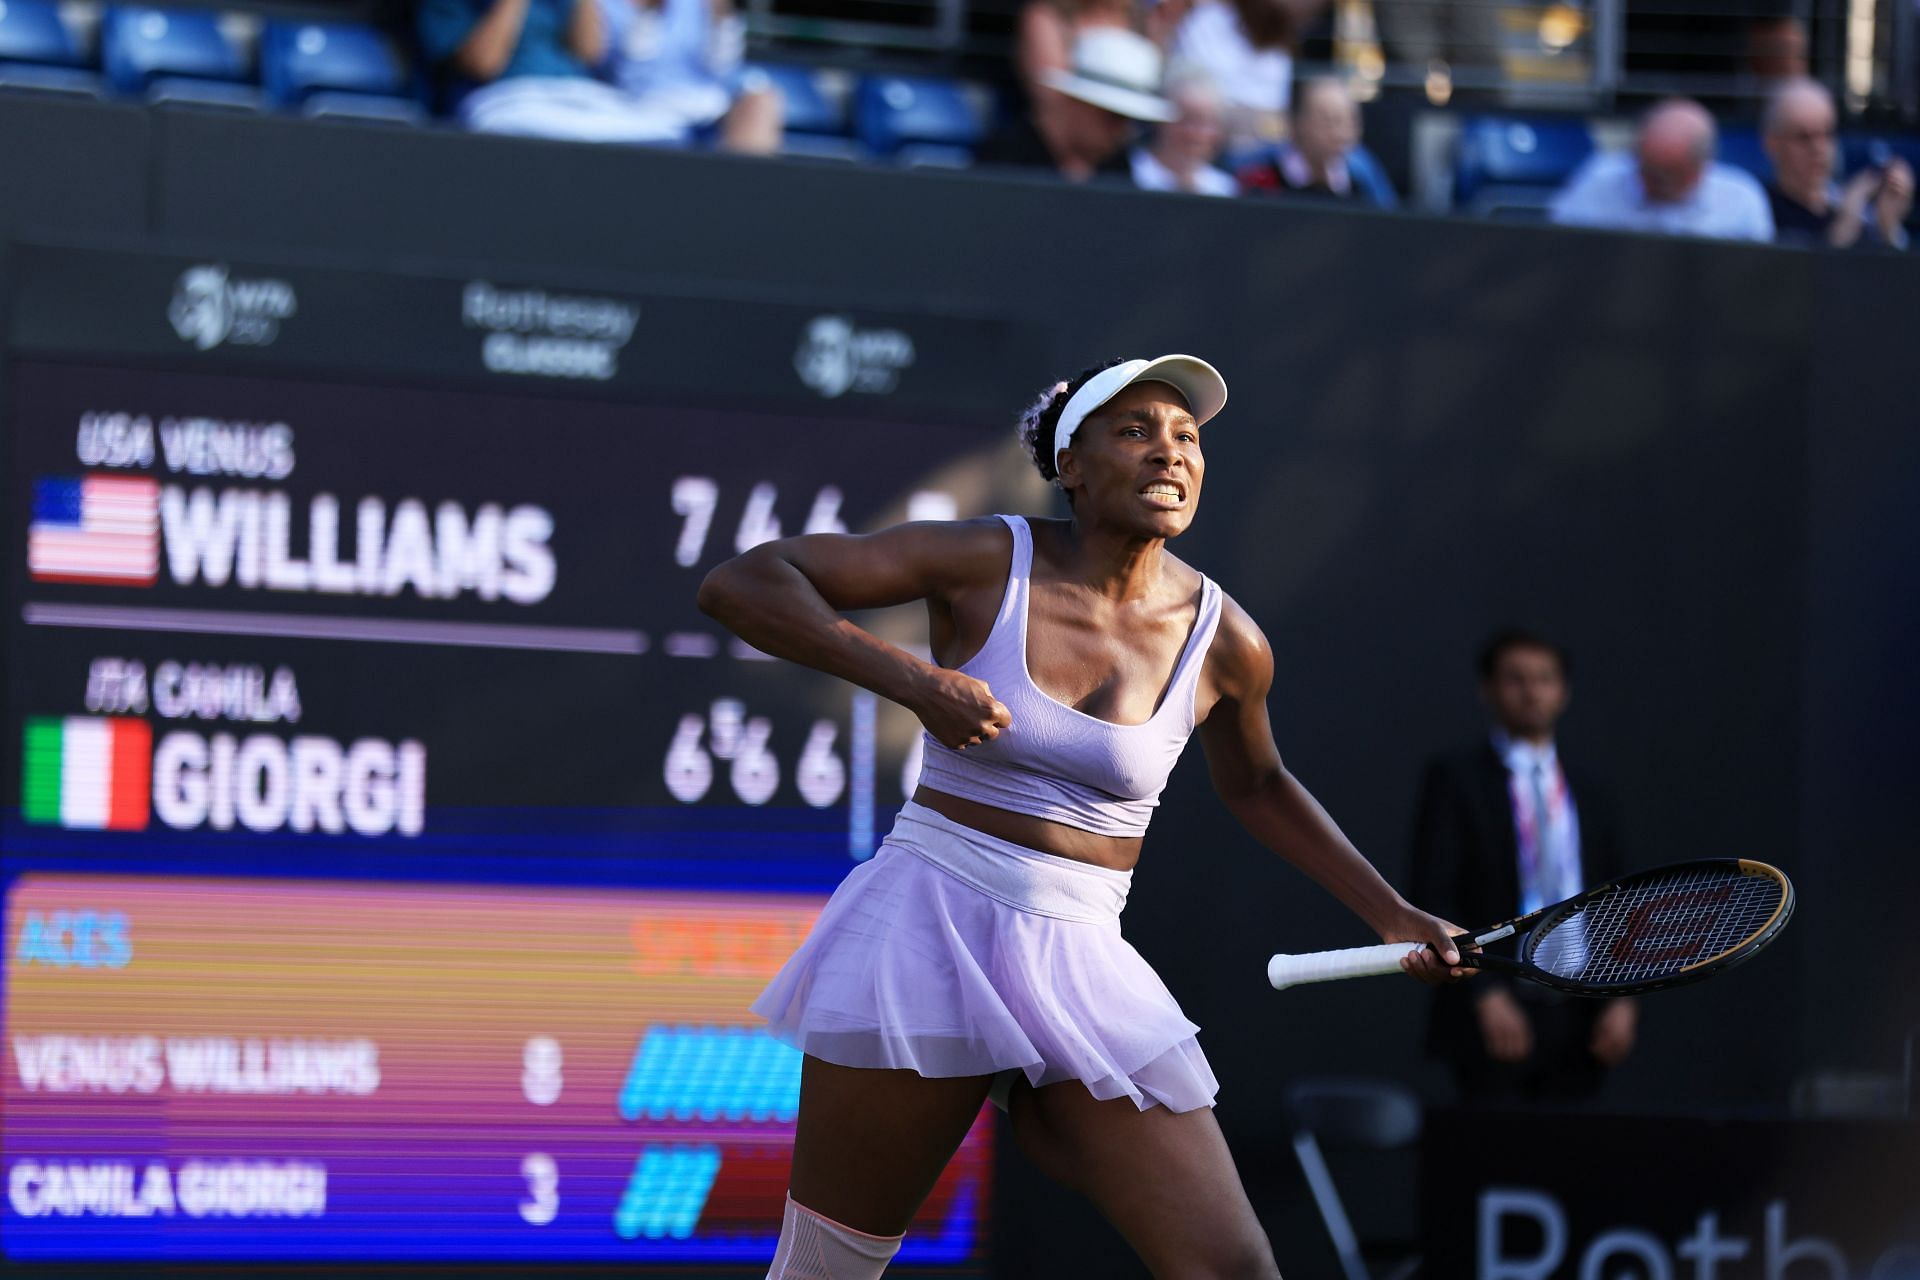 Venus Williams is looking for her third match win of the year.